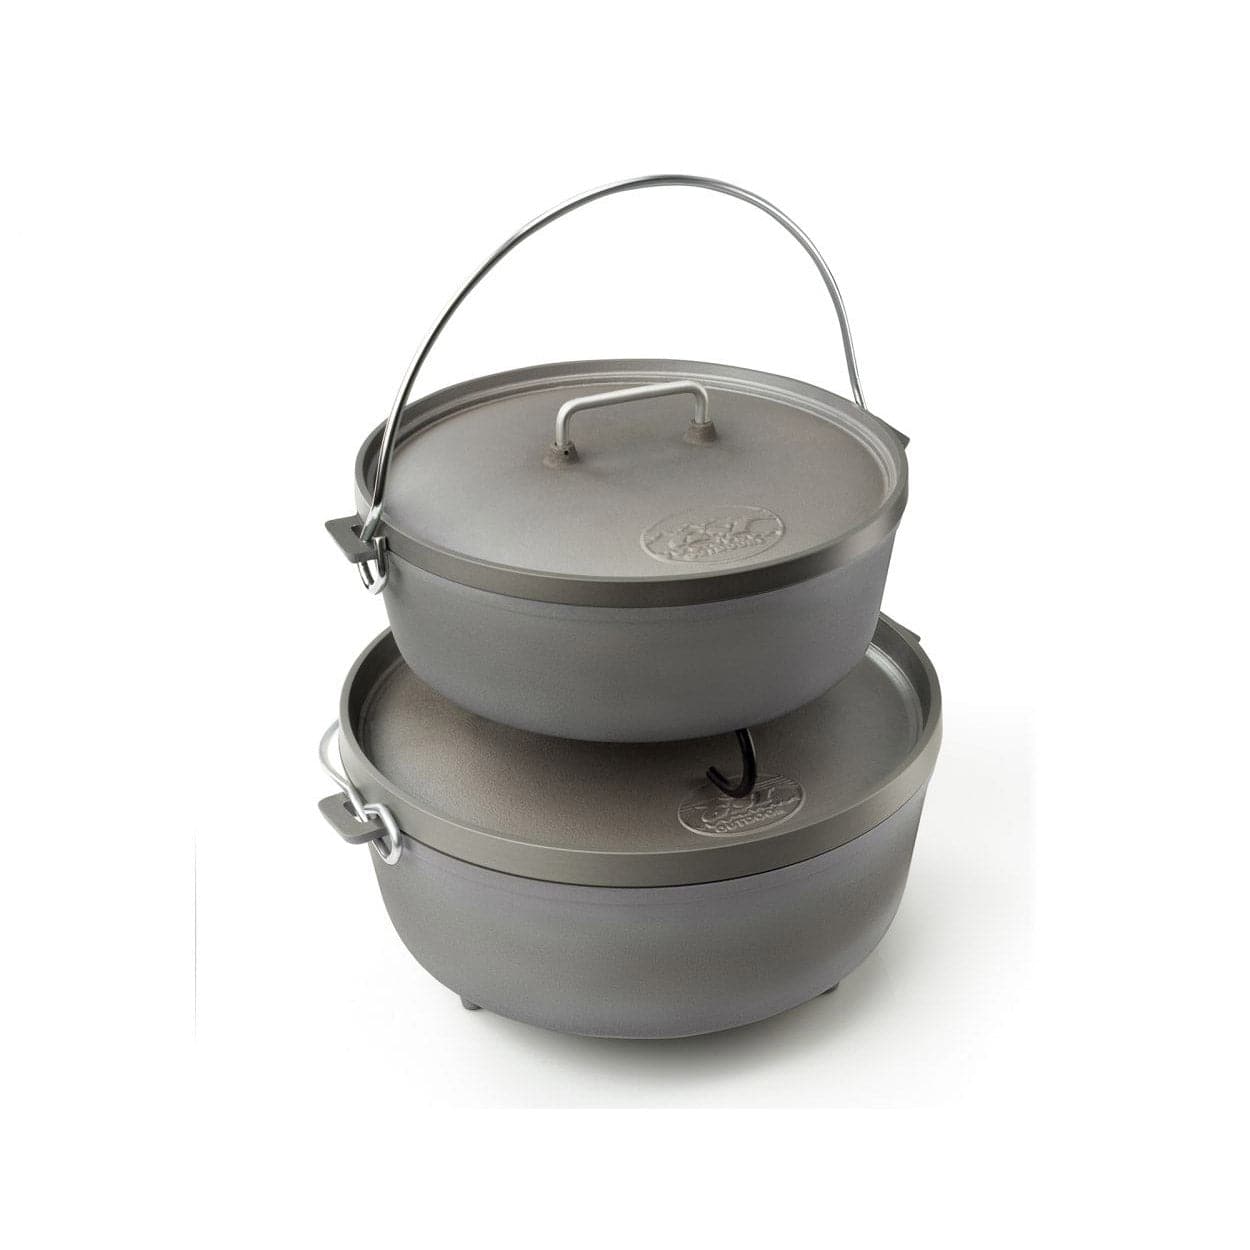 Featuring the Dutch Oven 12in GSI camp, dishes, kitchen manufactured by GSI shown here from a second angle.